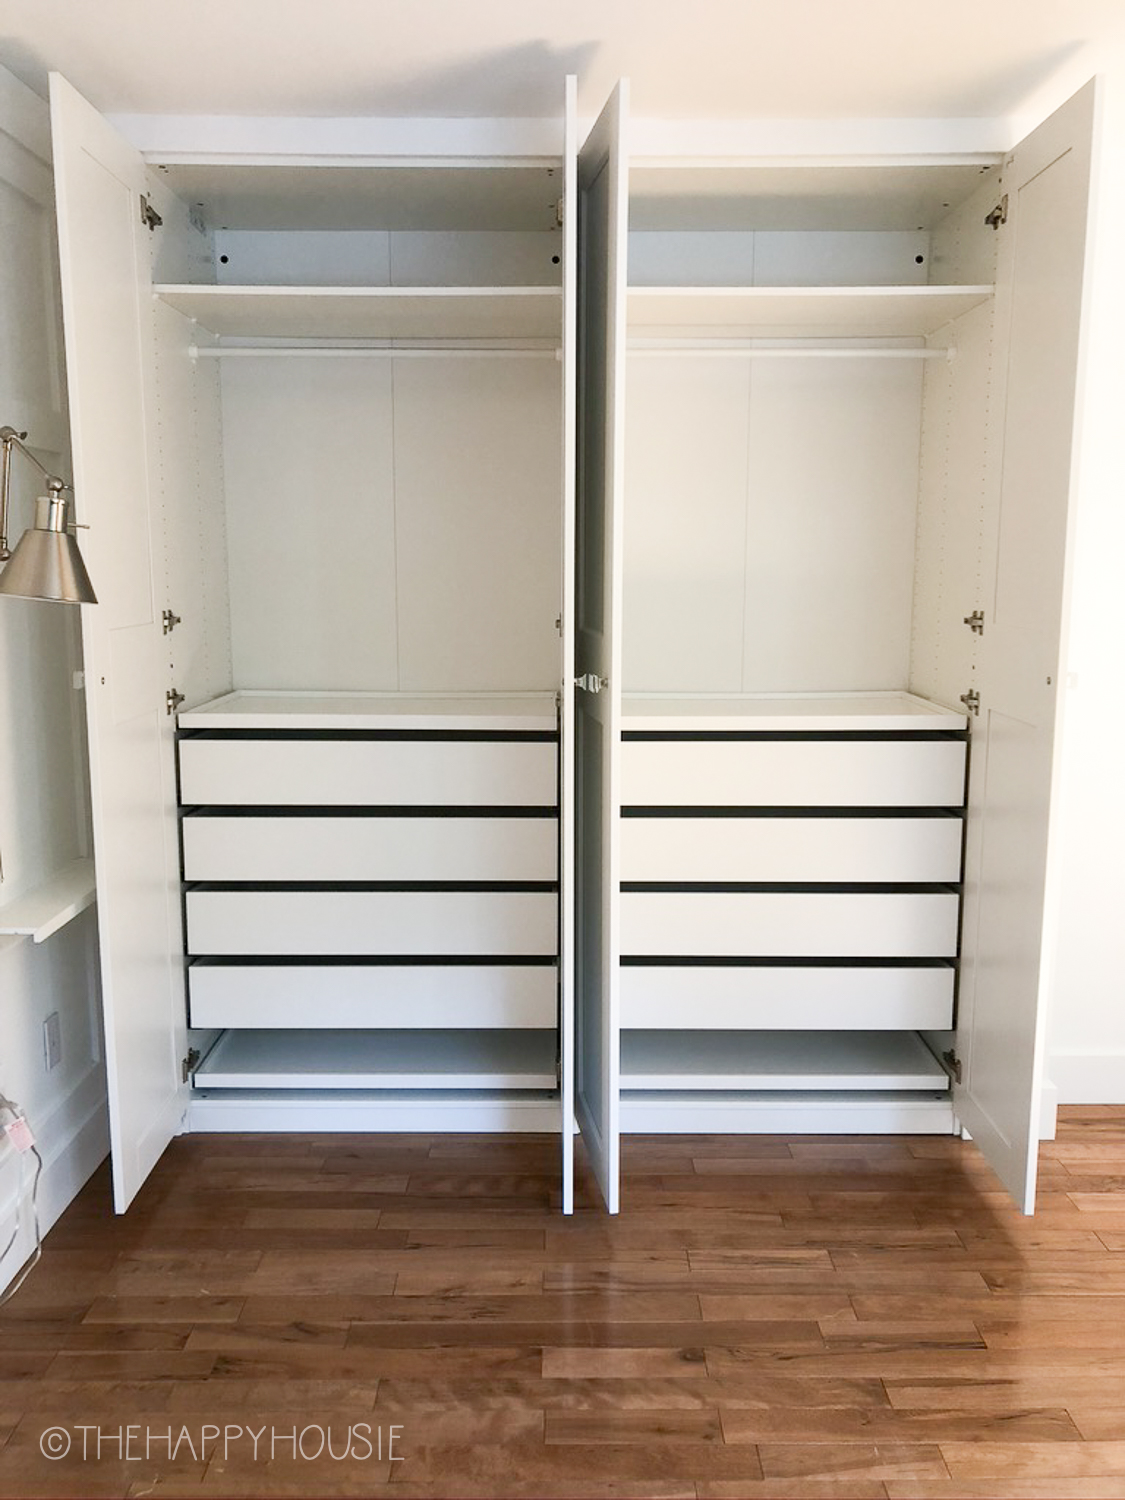 Replacing our Reach-in Closet with an Ikea Pax Closet System